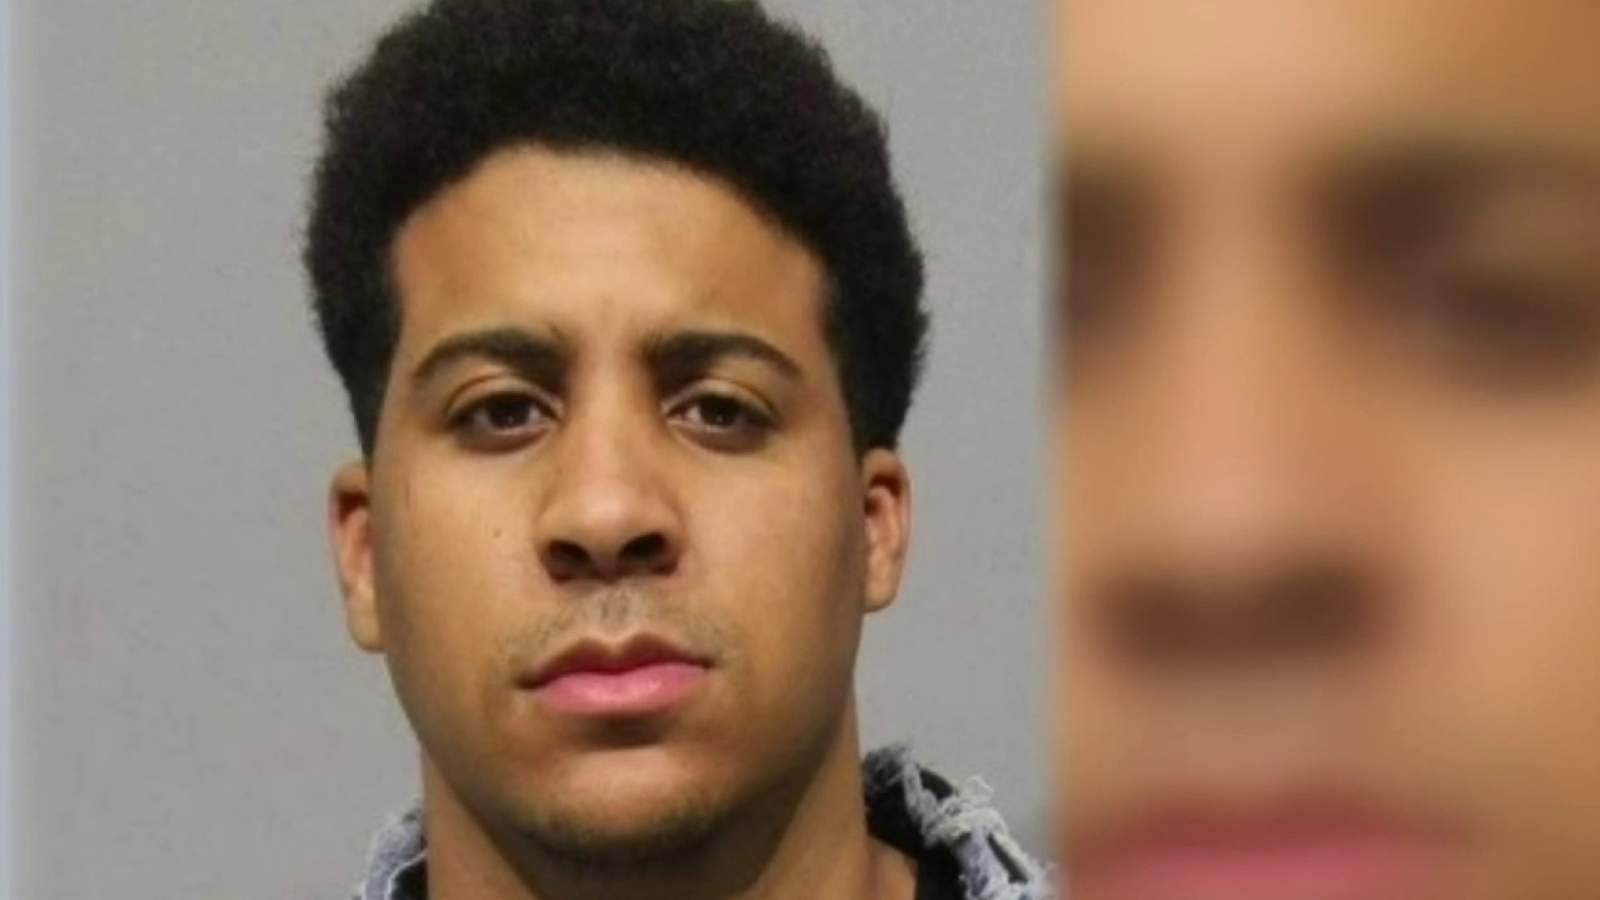 Eastern Michigan graduate charged with 9 counts of sexual assault